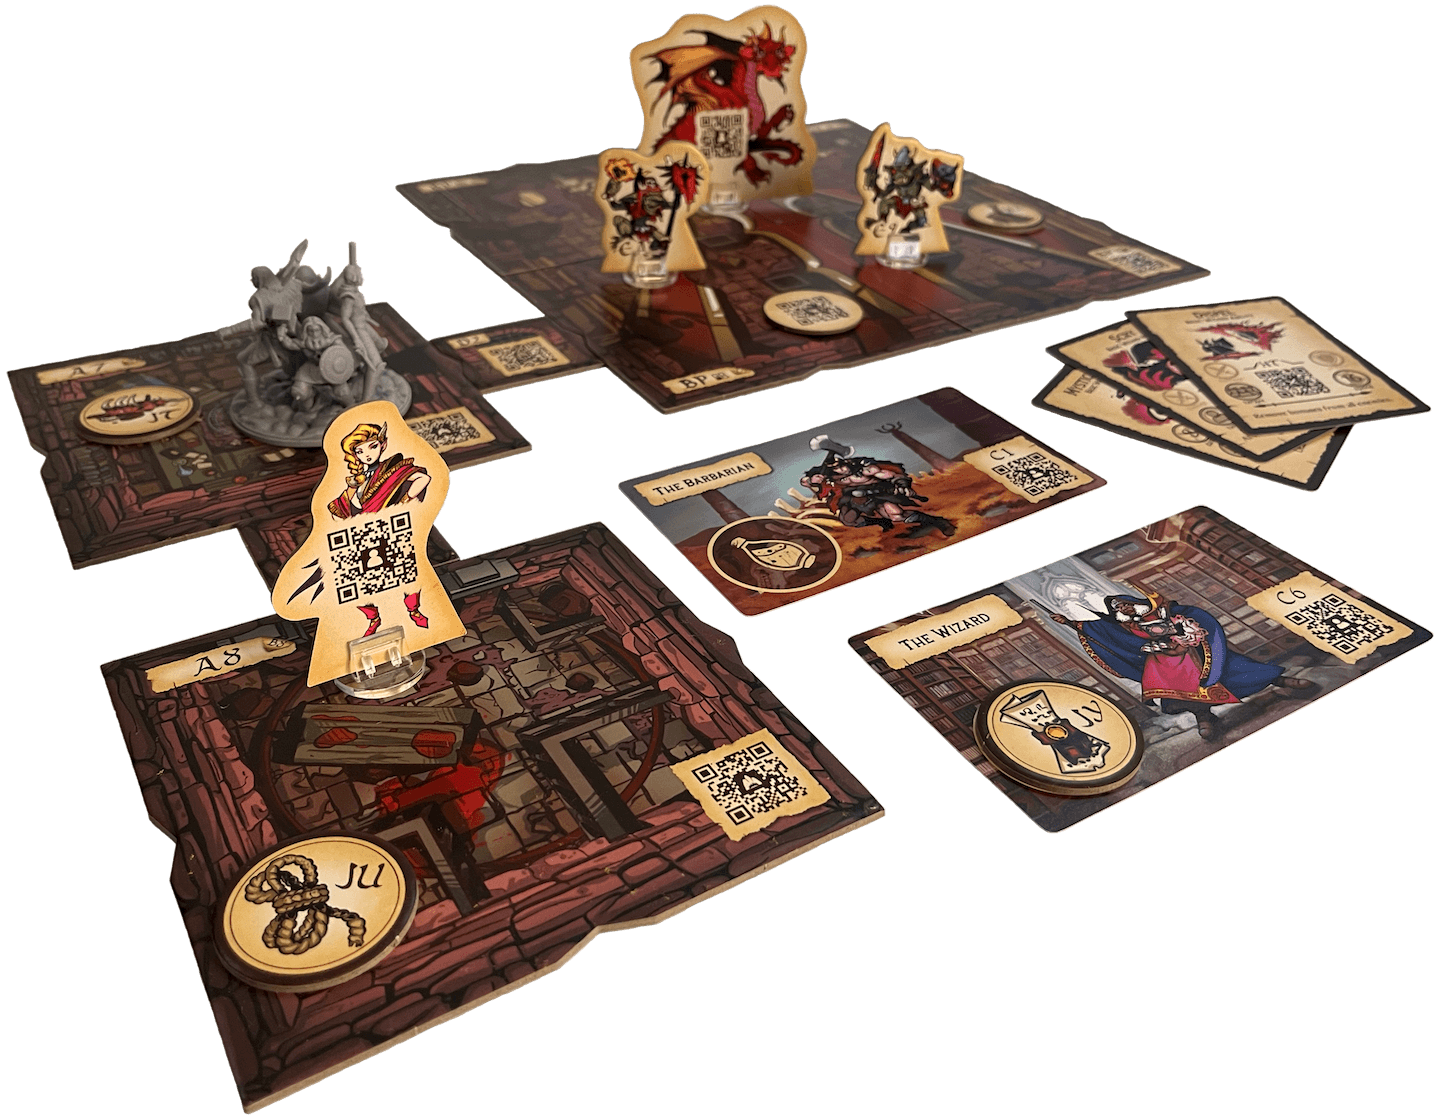 A game of Taelmoor played with tiles, standees, card and a miniature